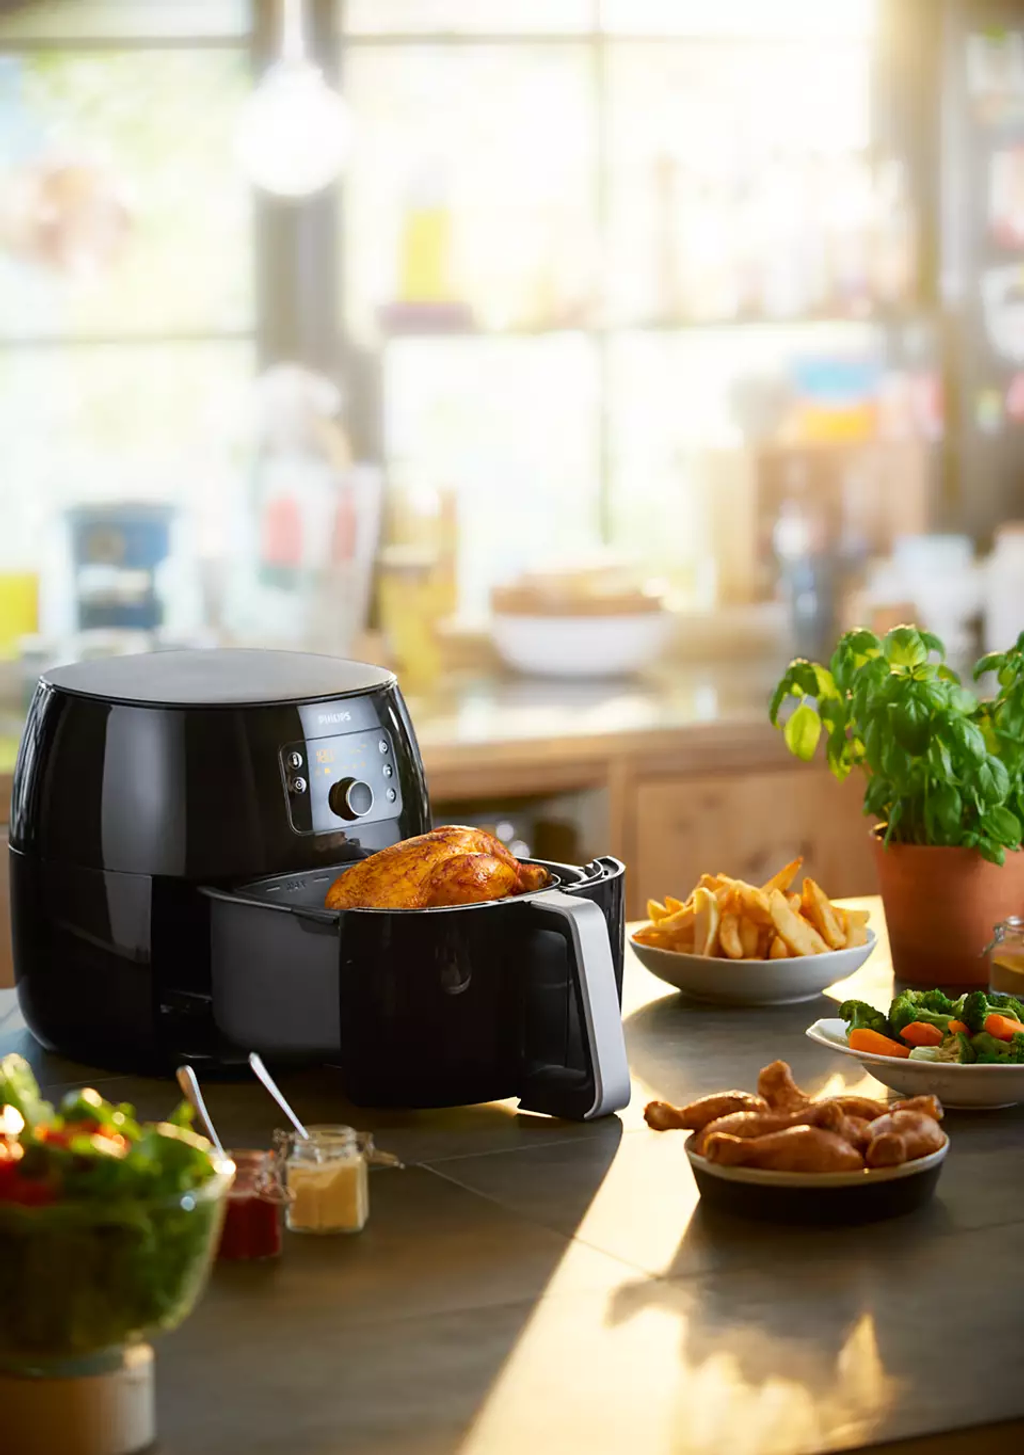 Make delicious meats, vegetables or snacks with the Philips Airfryer XXL (HD9653) from BIYU